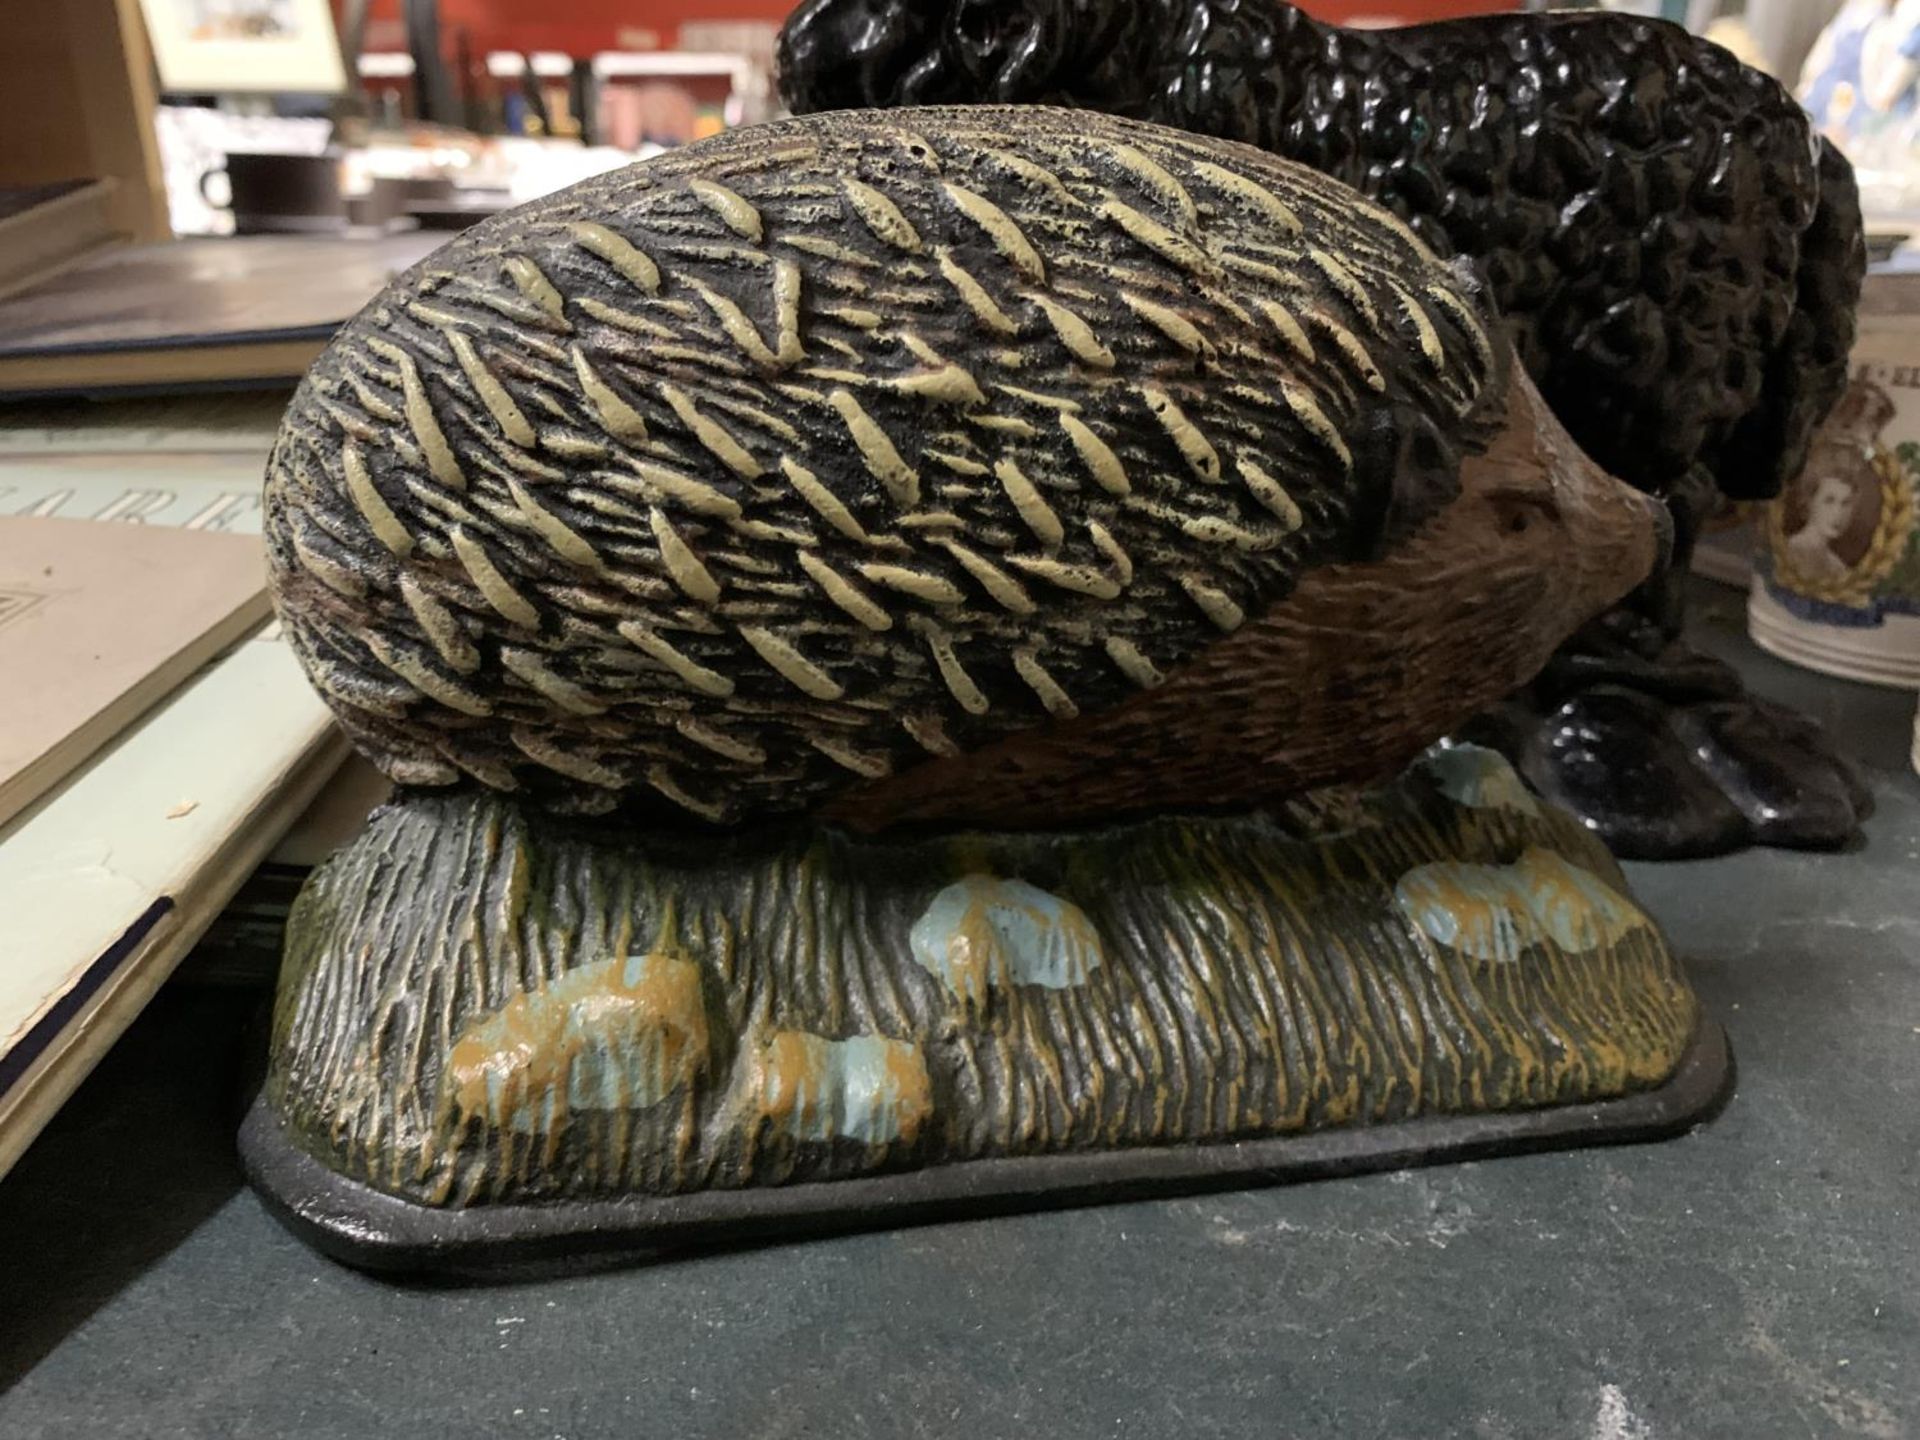 TWO CAST DOORSTOPS, ONE BEING A VINTAGE SHEEP, THE OTHER A HEDGEHOG - Image 2 of 3